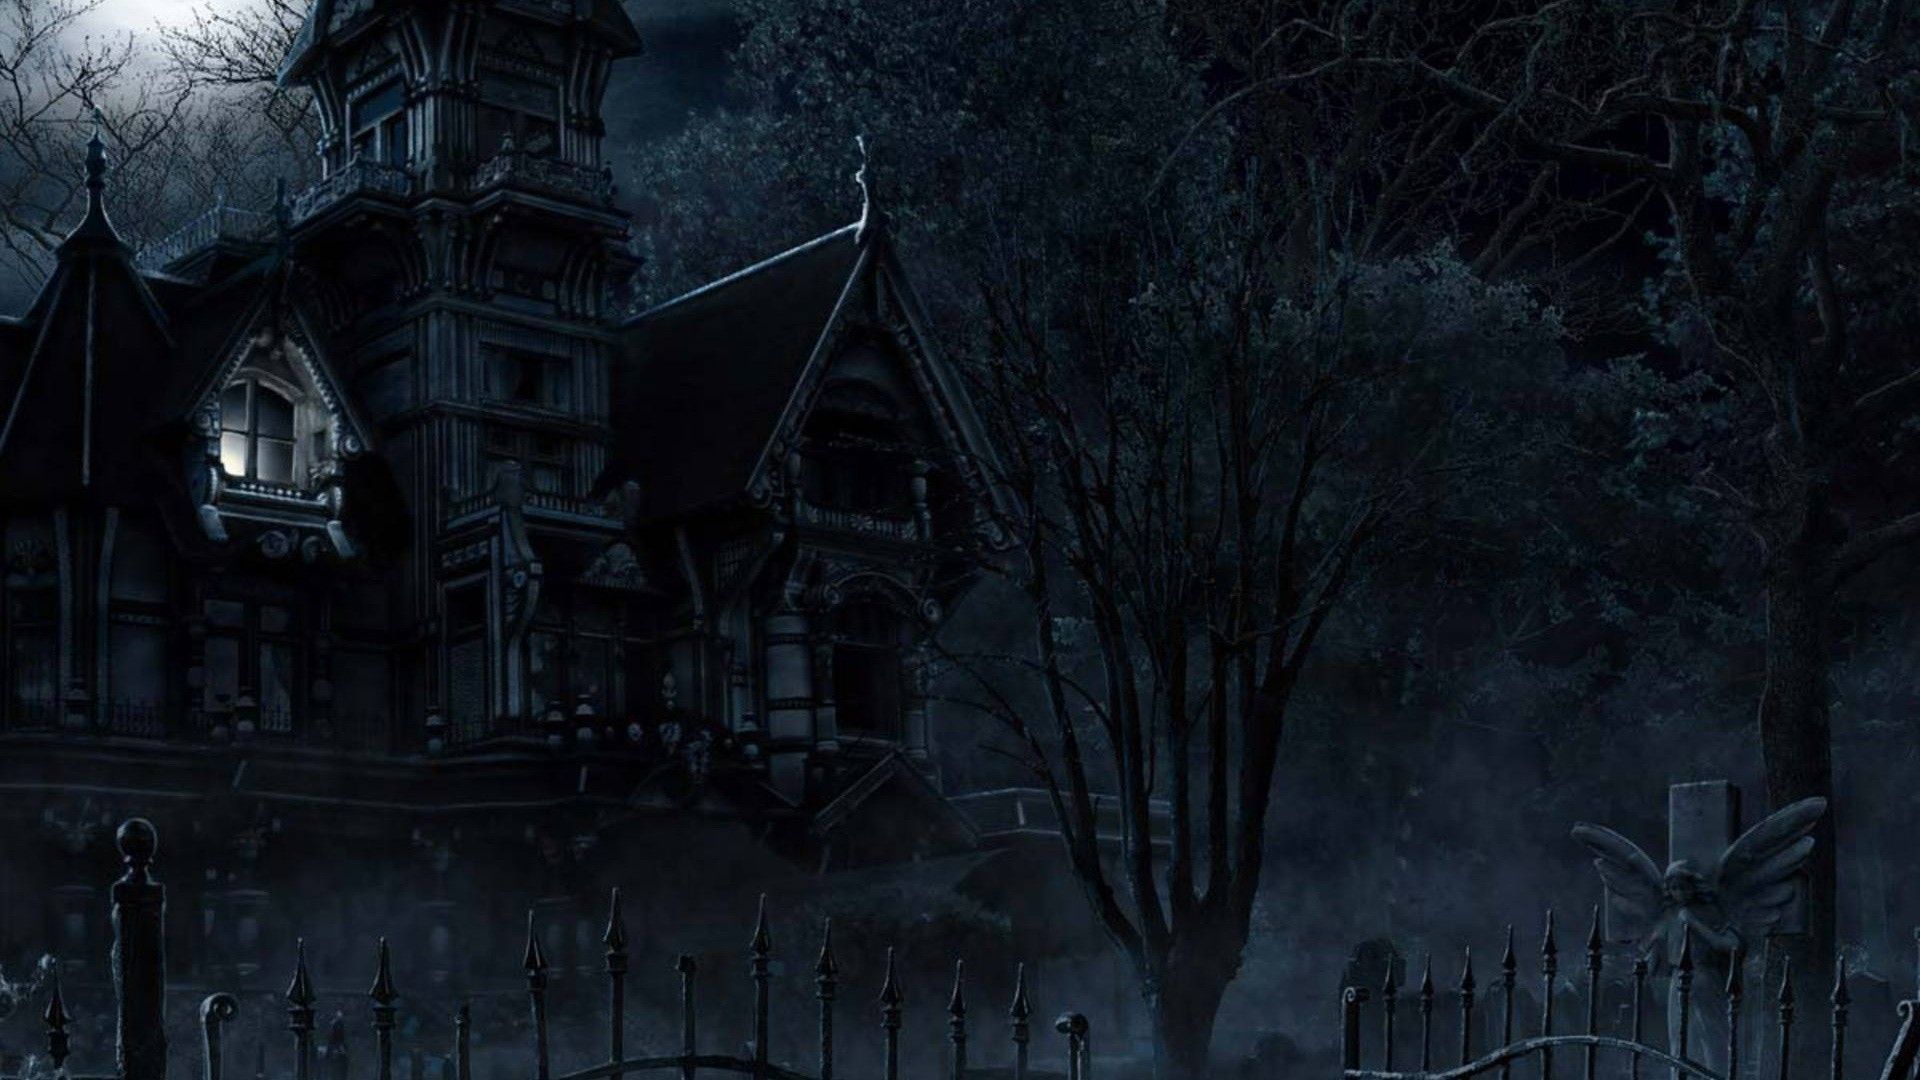 Dark house in the forest - Horror, creepy